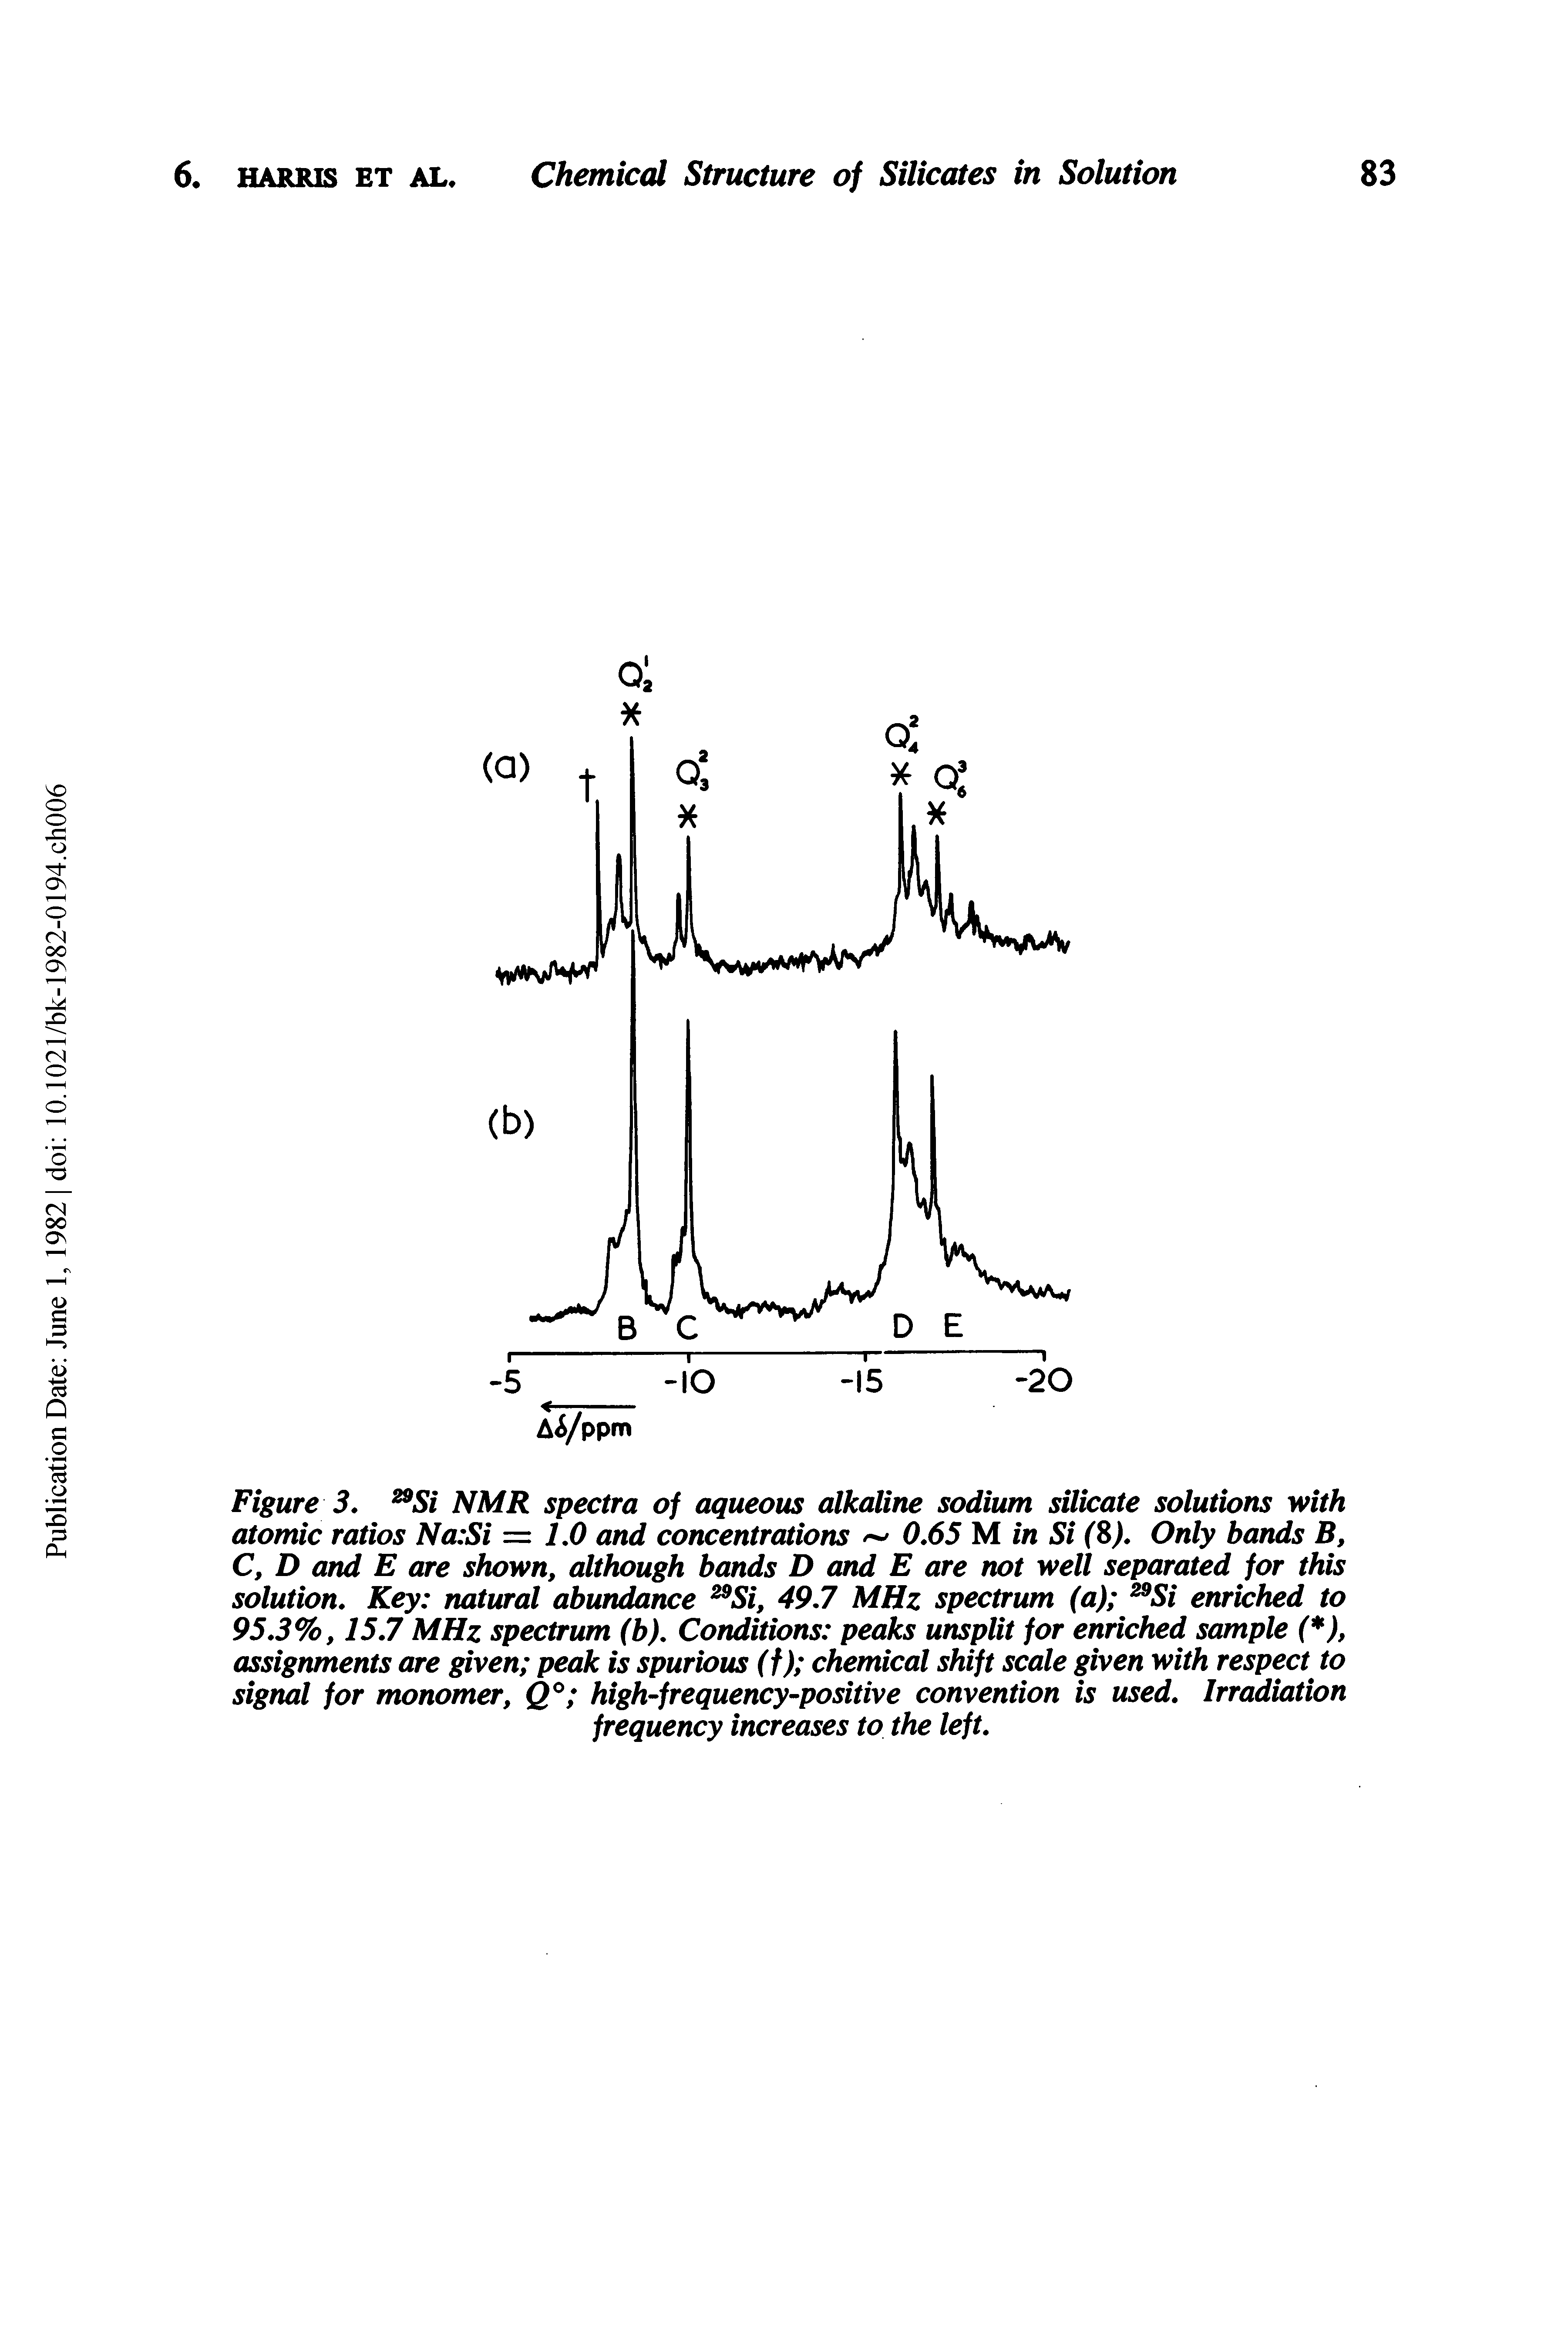 Figure 3. Si NMR spectra of aqueous alkaline sodium silicate solutions with atomic ratios Na Si = LO and concentrations 0.65 M in Si (8). Only bands B, C, D and E are shown, although bands D and E are not well separated for this solution. Key natural abundance Si, 49.7 MHz spectrum (a) Si enriched to 95.3%, 15.7 MHz spectrum (b). Conditions peaks unsplit for enriched sample ( ), assignments are given peak is spurious (f) chemical shift scale given with respect to signal for monomer, Q high-frequency-positive convention is used. Irradiation frequency increases to the left.